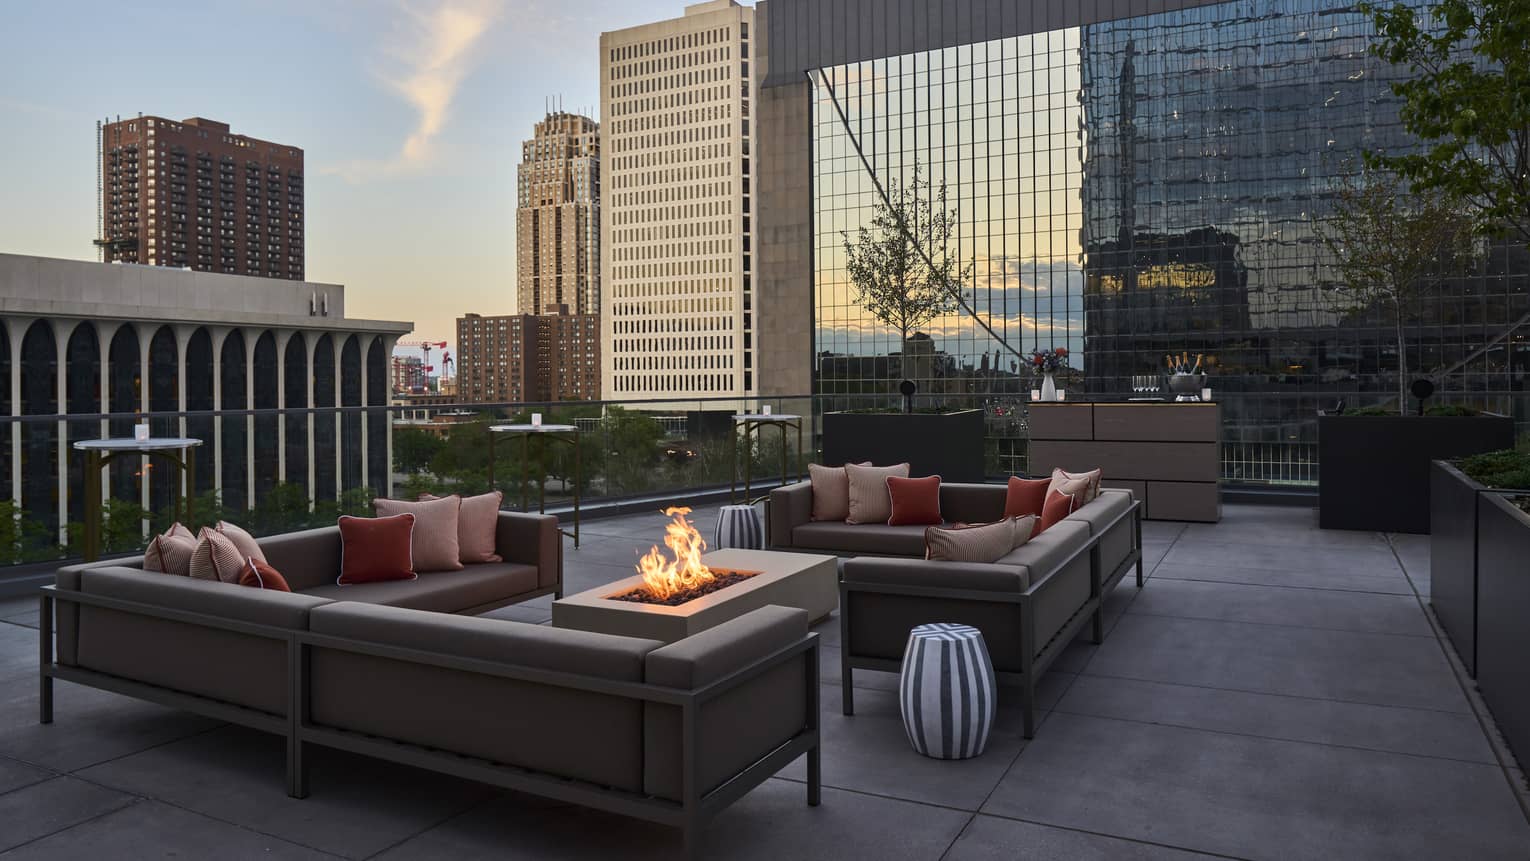 A seating area on a terrace with a fire pit, couches and small tables.